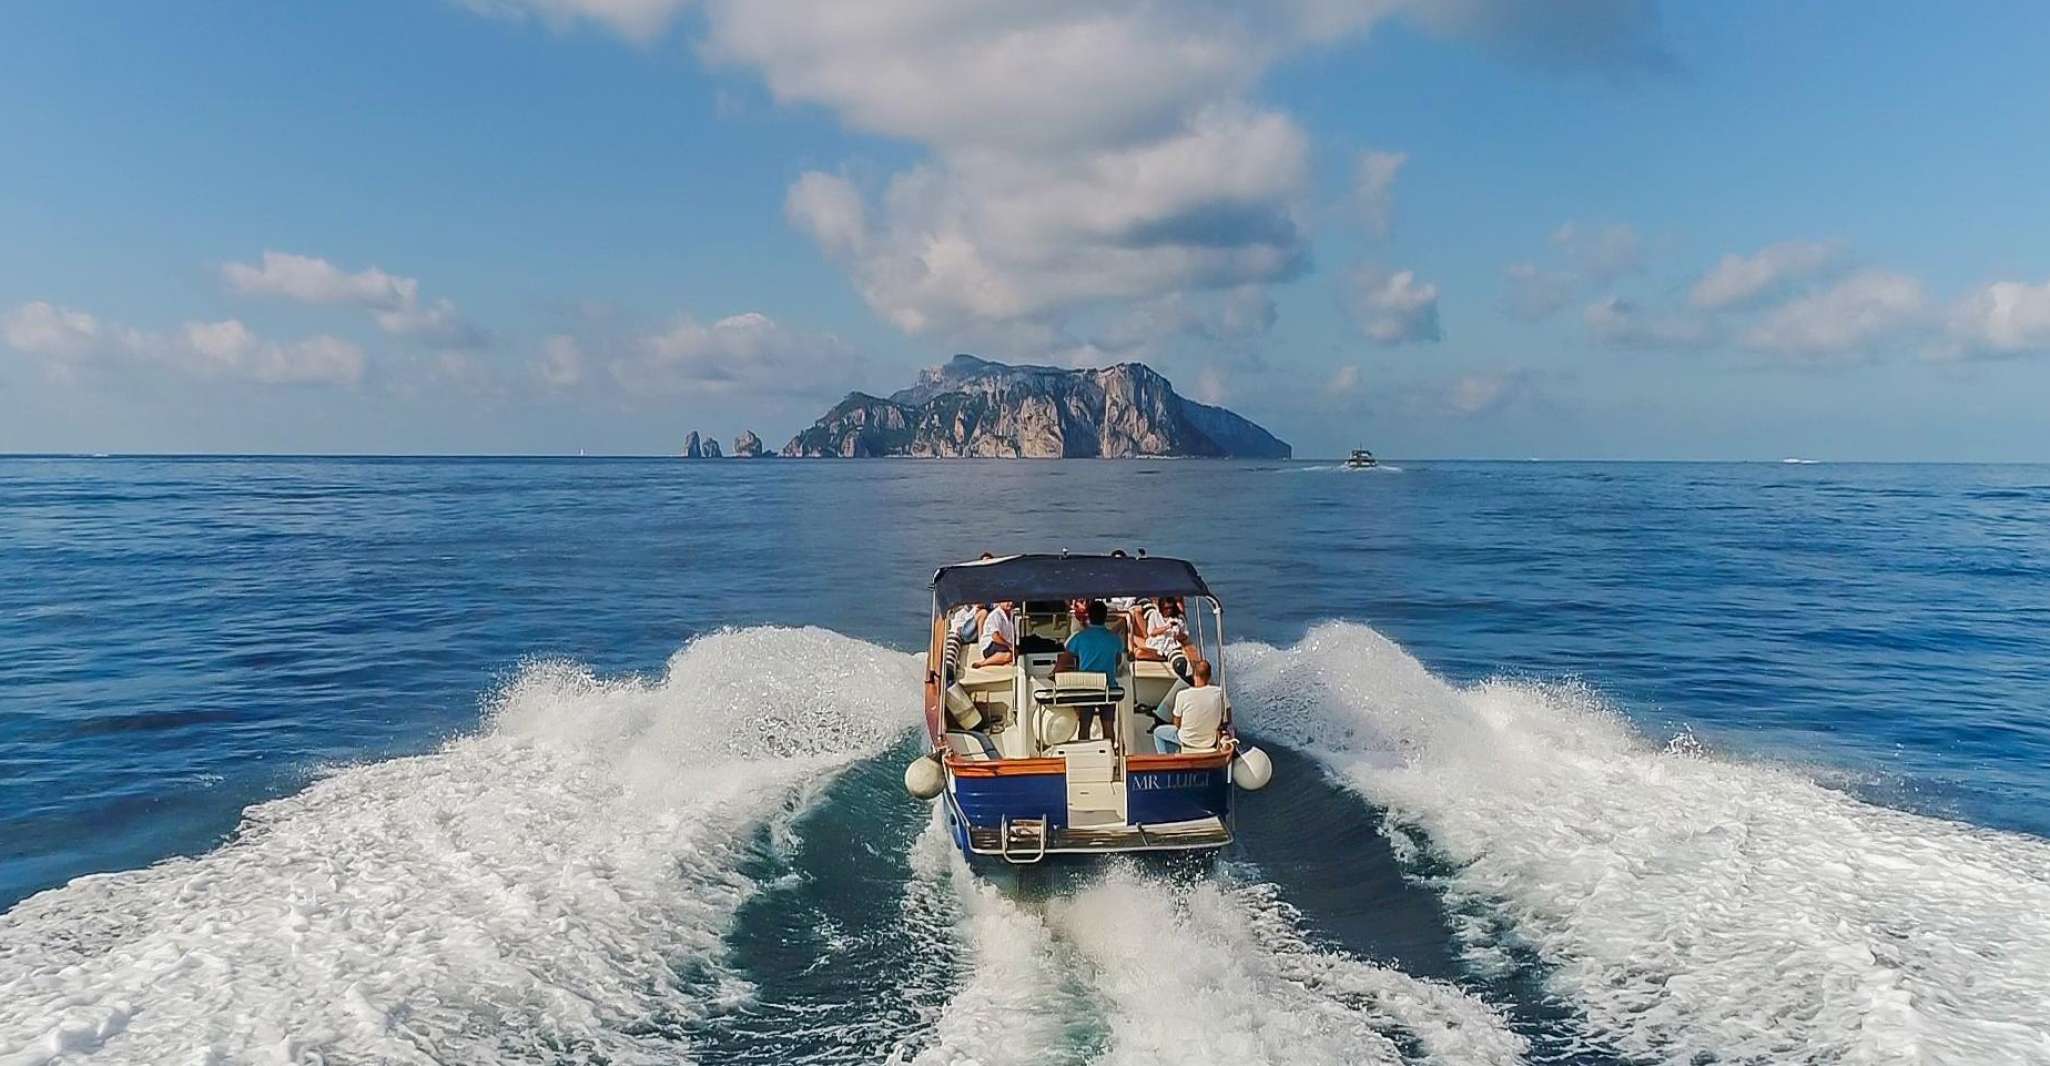 From Positano, Day trip to Capri - Group Tour by boat - Housity